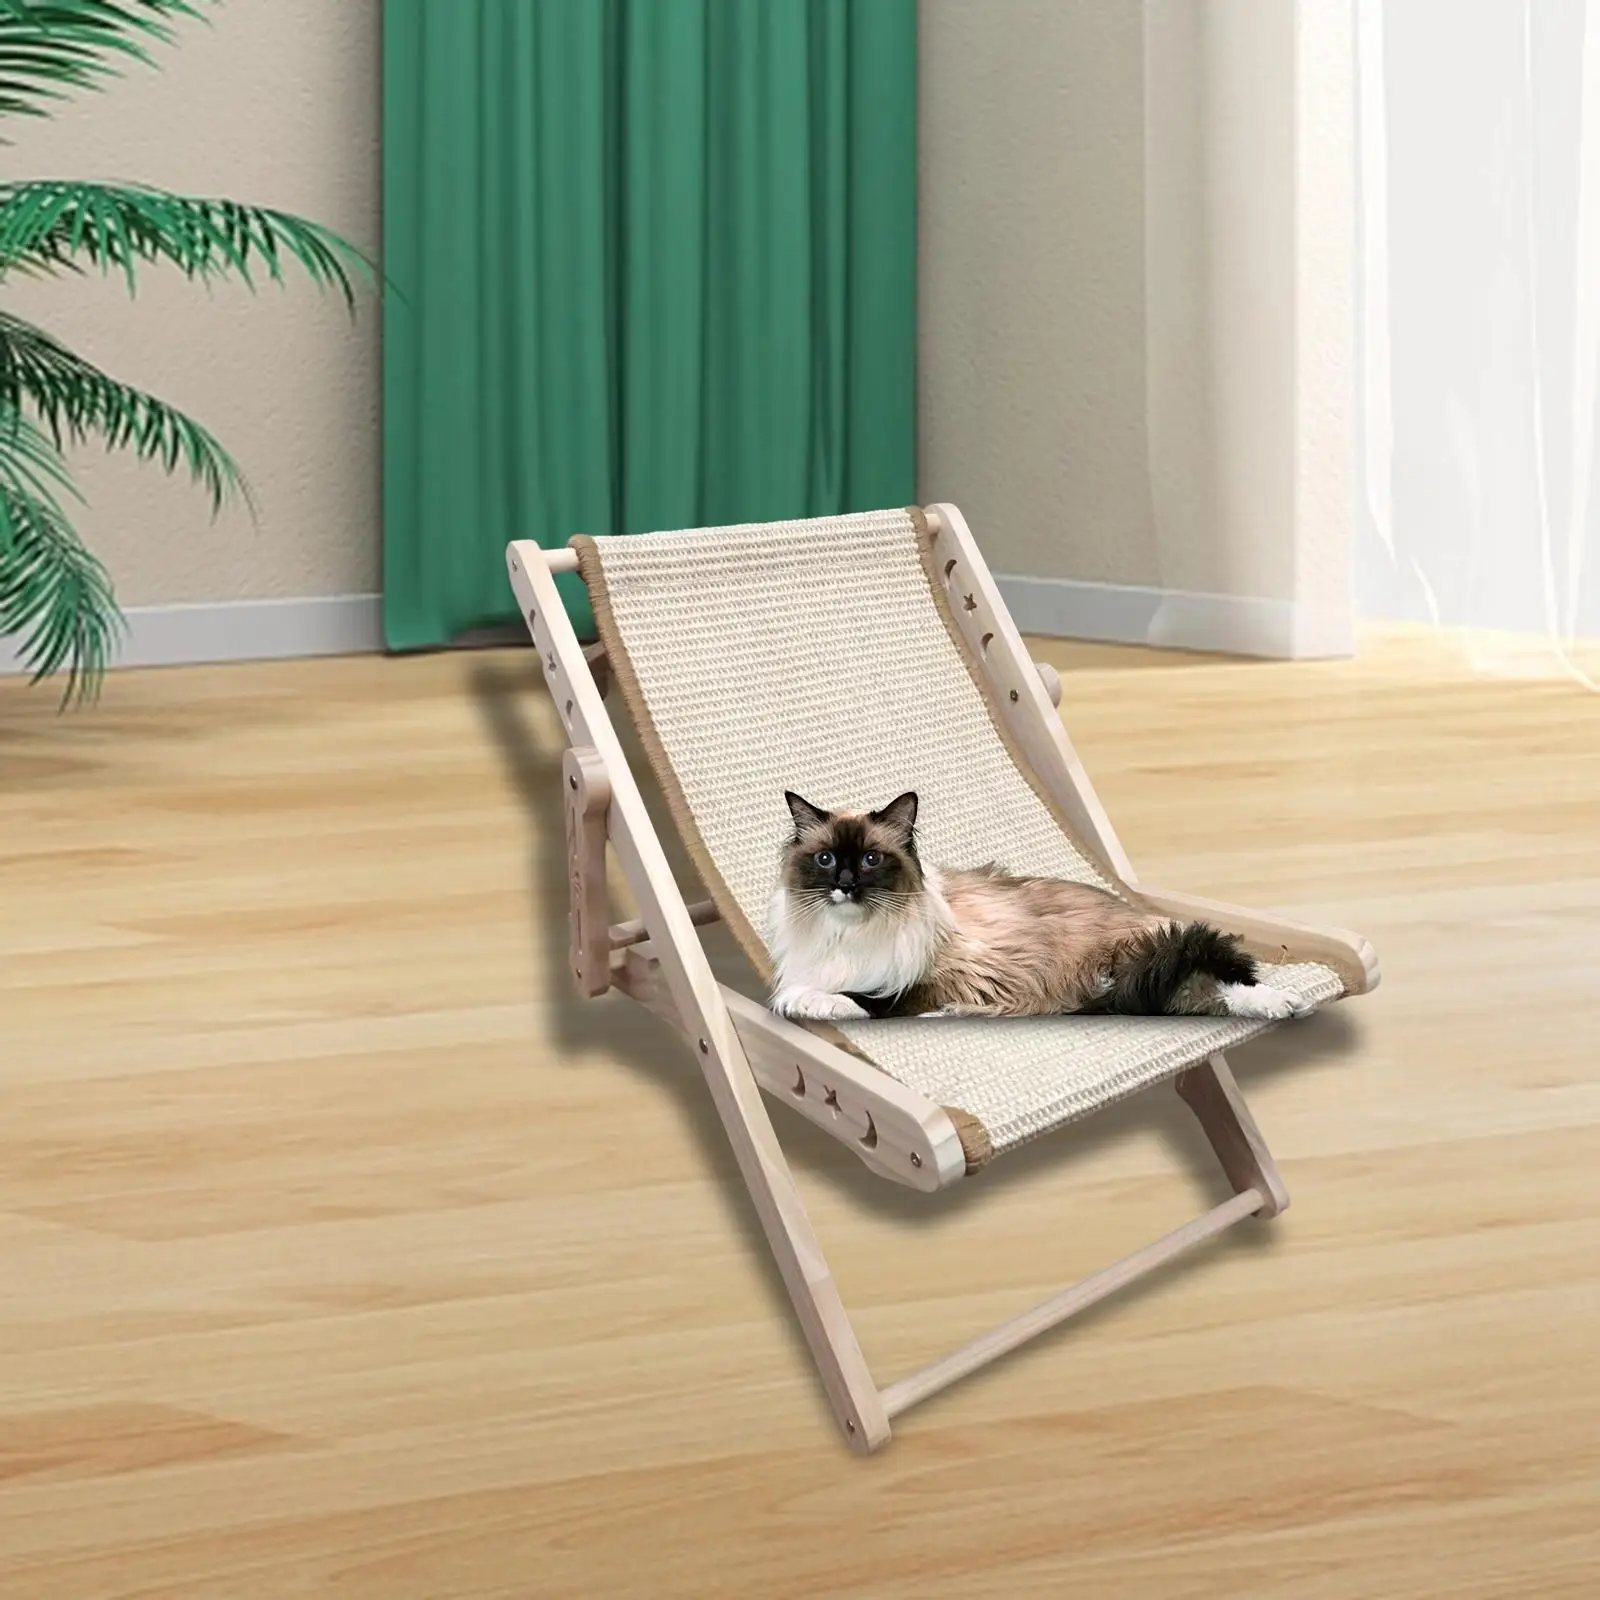 Cat Lounge Chair Floor Standing Comfortable Sleeping Modern Raised Bed for Indoor Cats Small Dogs Puppy Small Animal Bunny